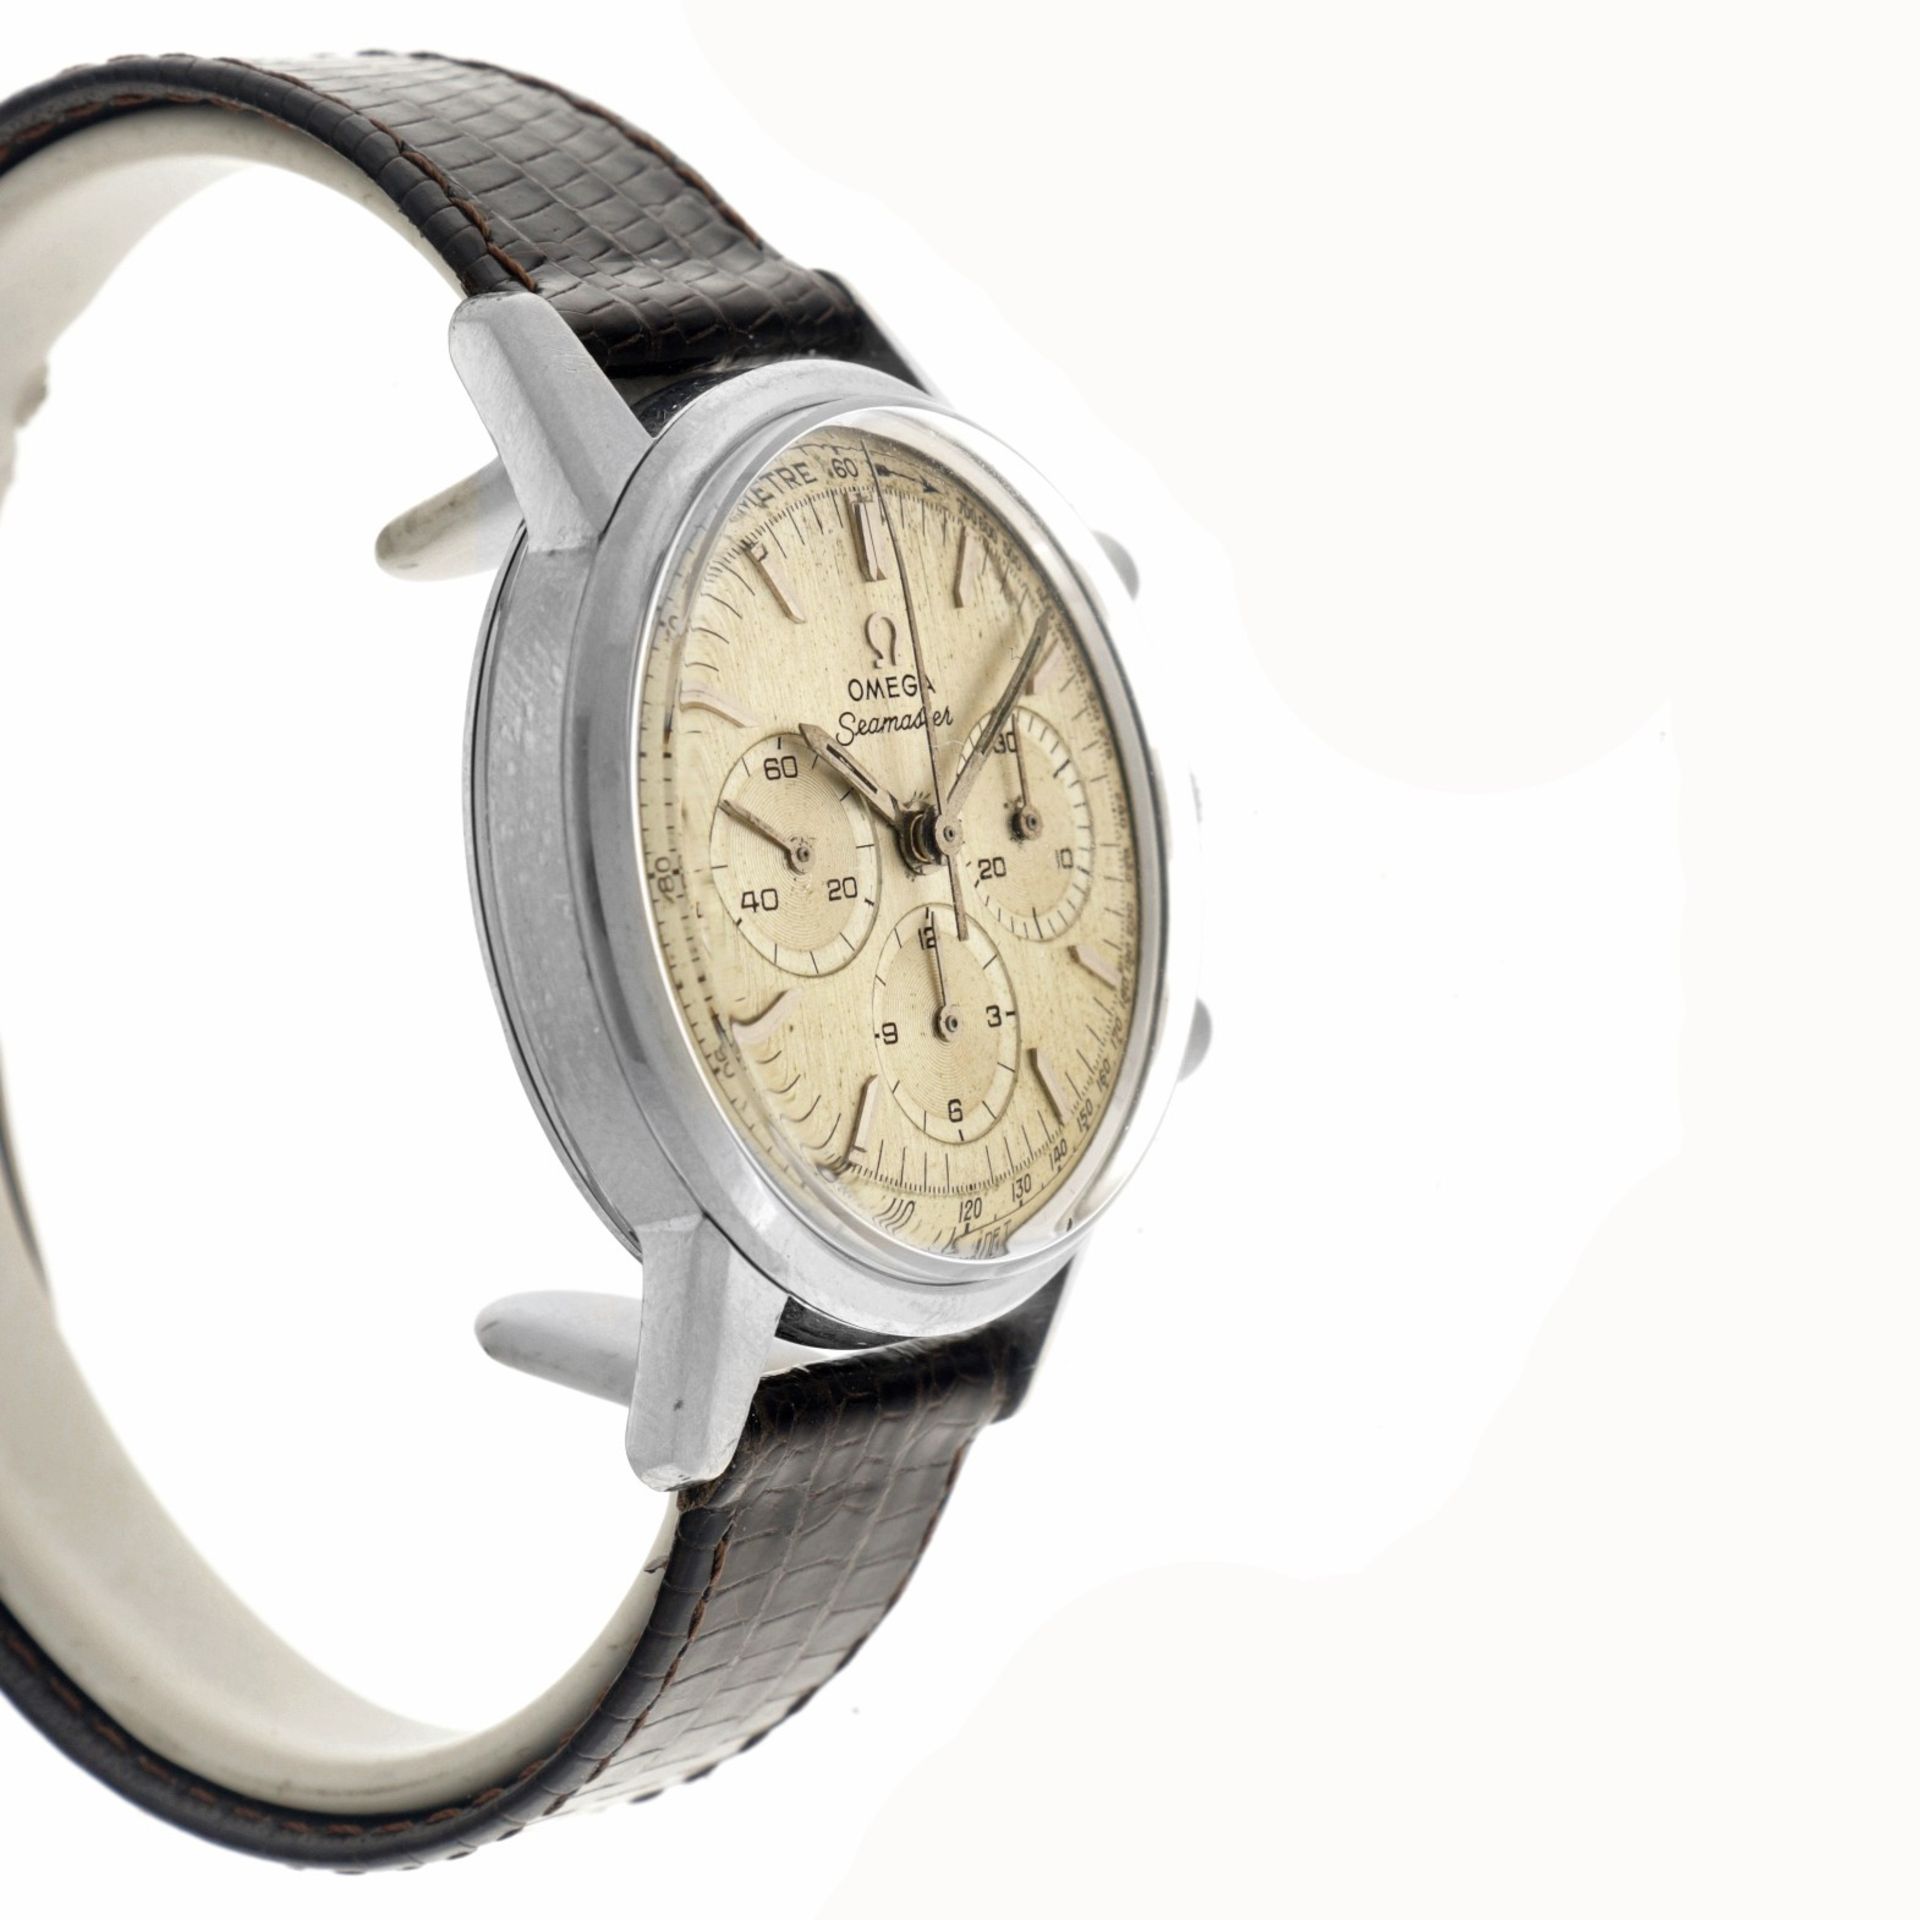 Omega Seamaster Chronograph 105.001 - Cal. 321 - Men's watch - approx. 1963. - Image 4 of 6